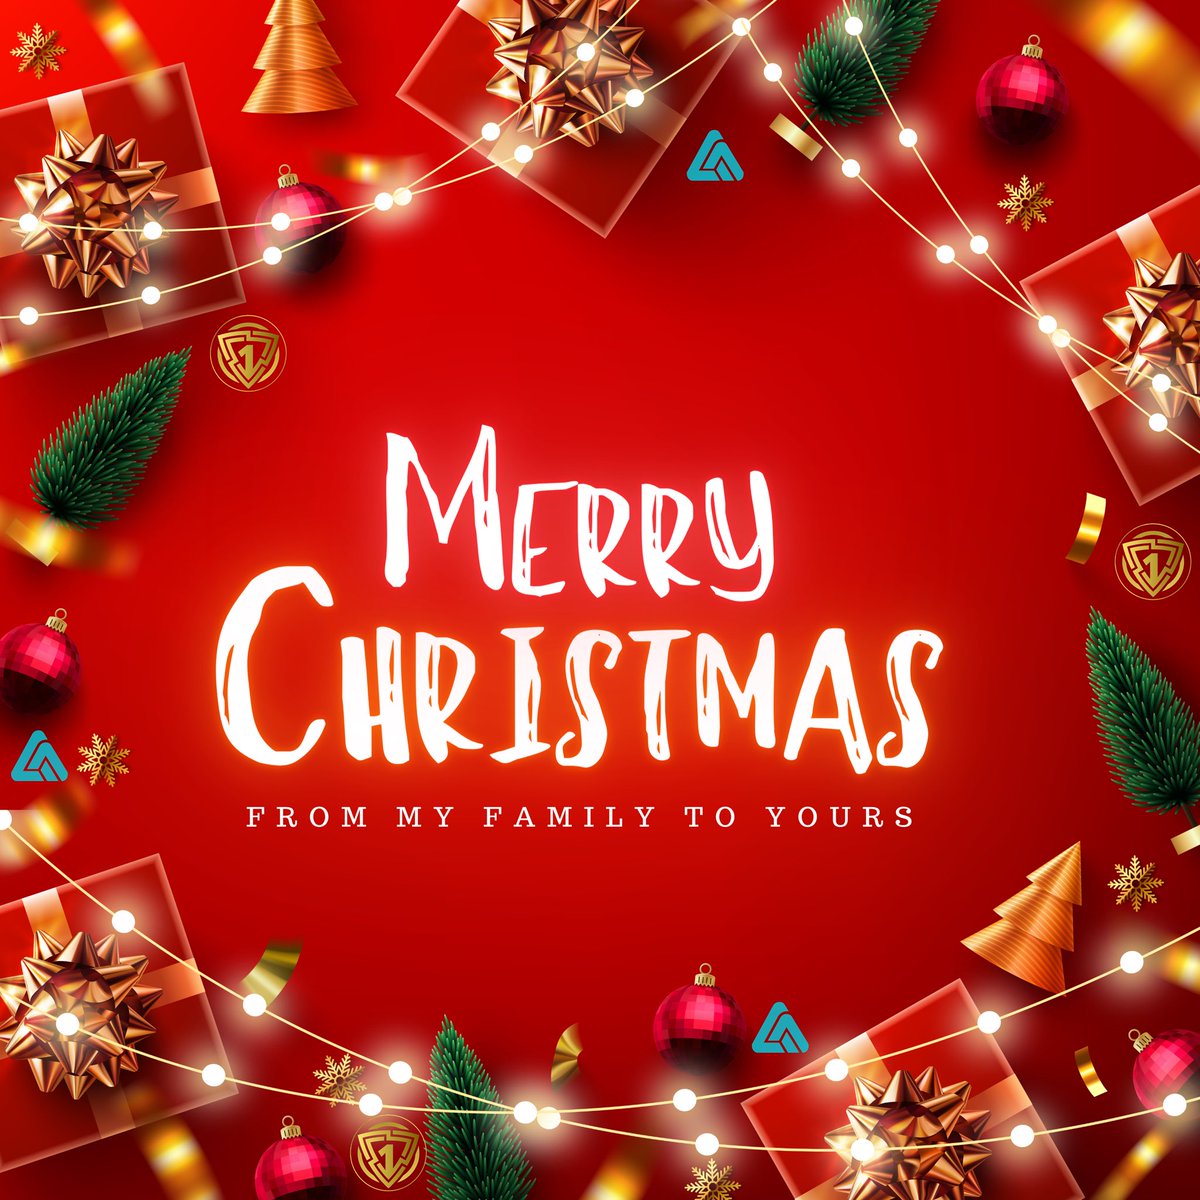 Merry Christmas to all! May your day be filled with love, laughter, and cherished moments.  #MerryChristmas #FamilyLove #ALPHA #ALPHACITYAI $BANK